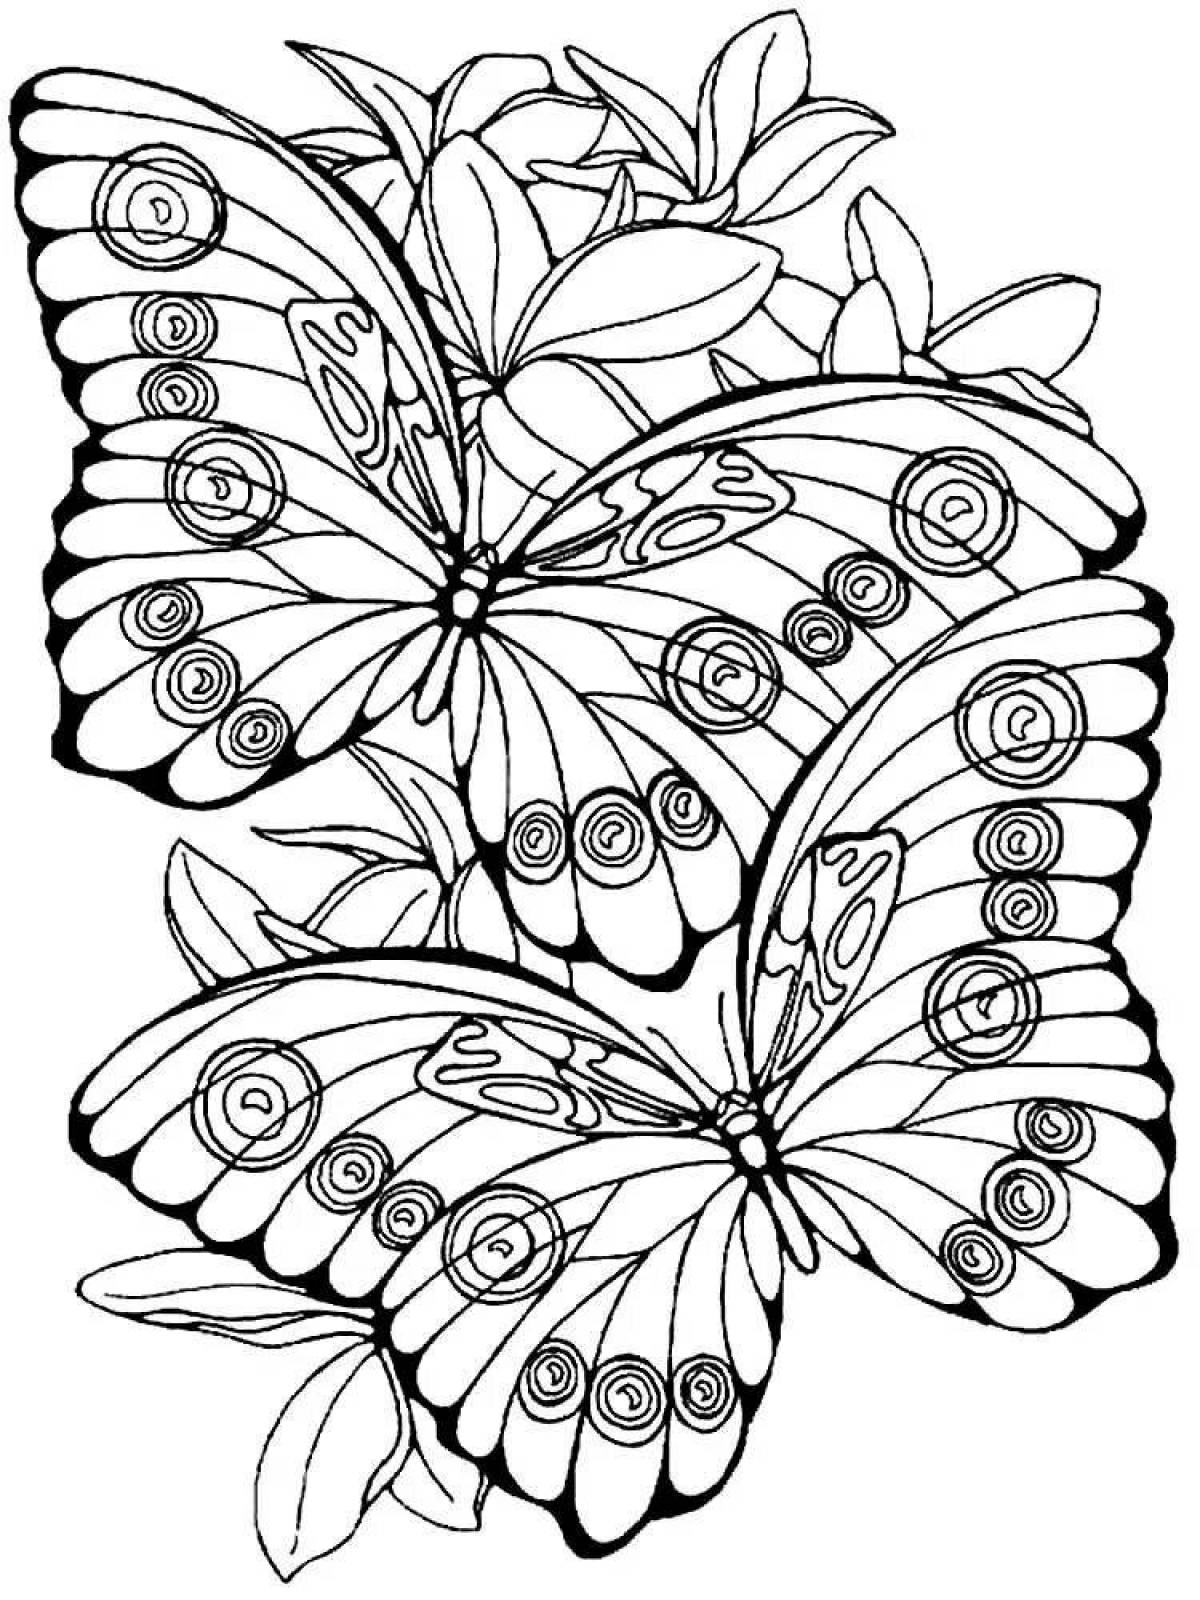 Creative drawings coloring pages